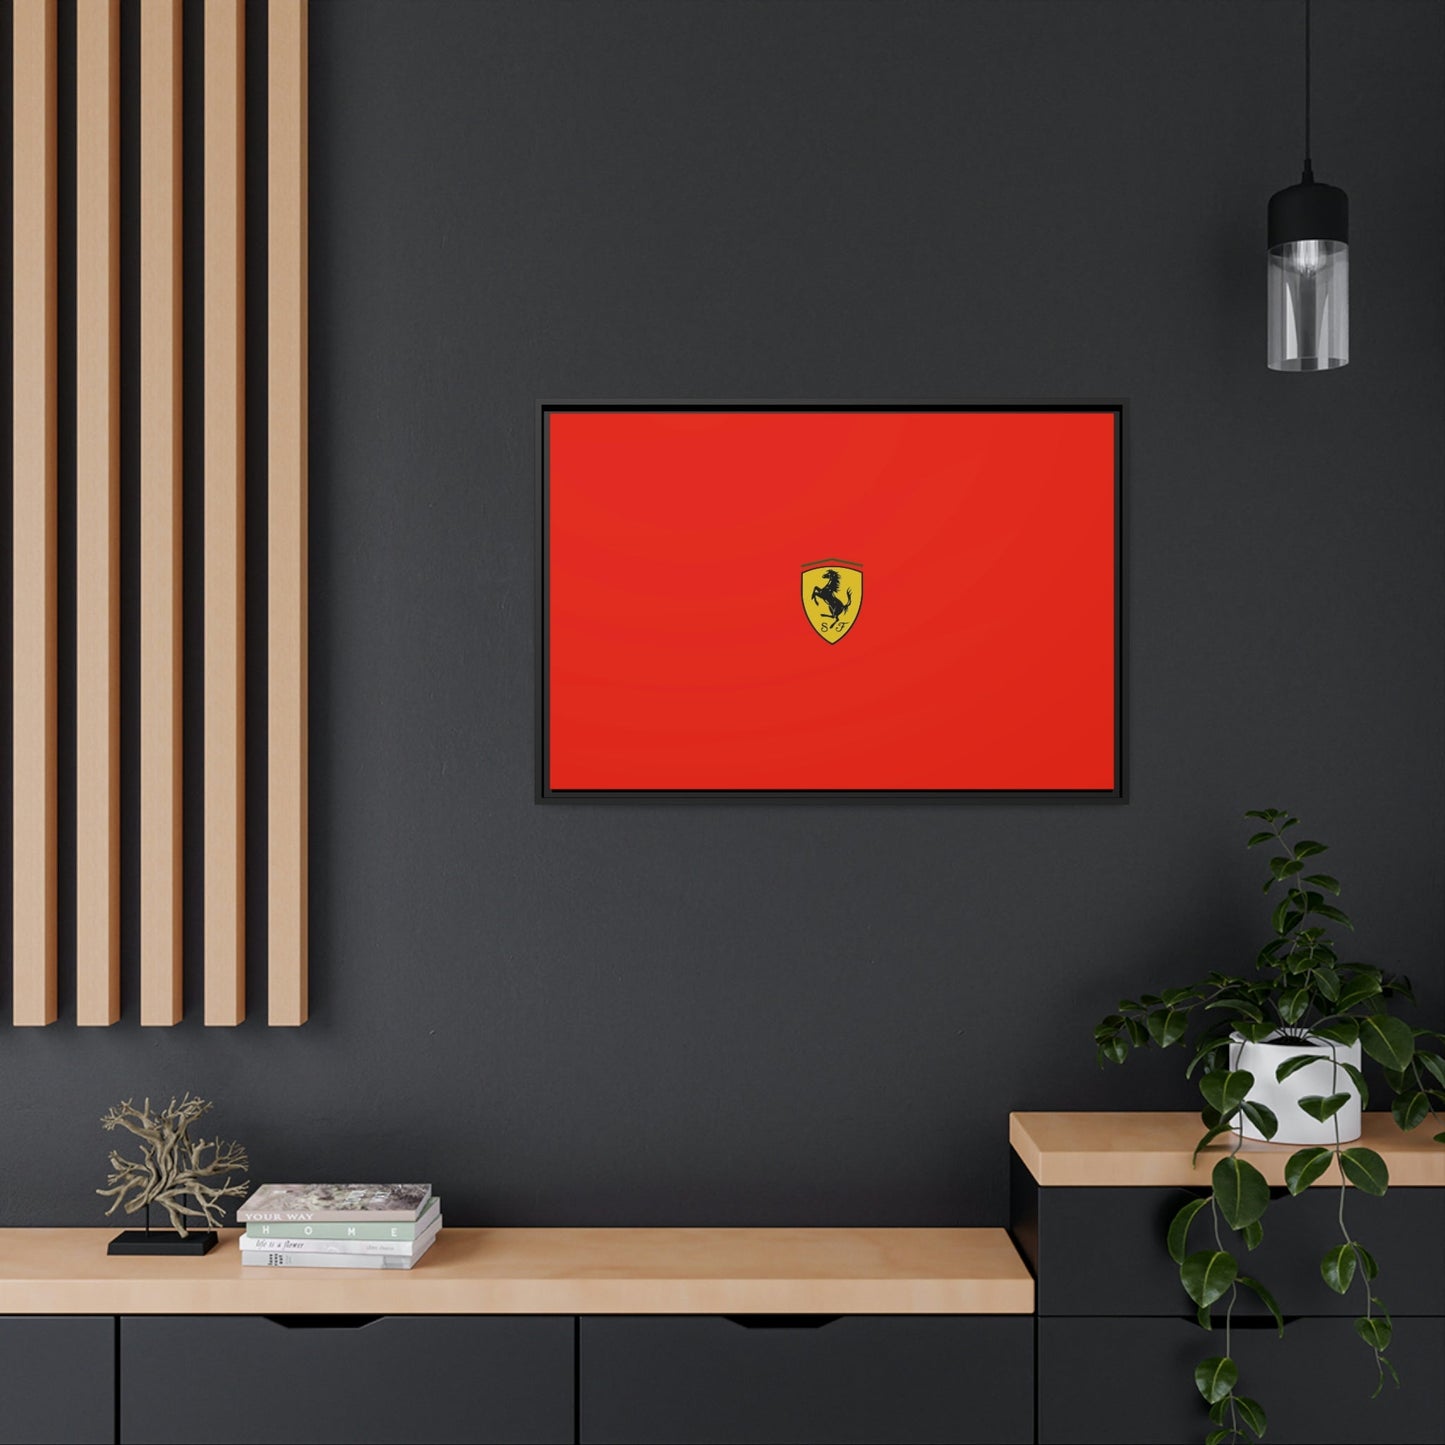 Prancing Horse: Framed Canvas and Poster of Ferrari's Iconic Symbol